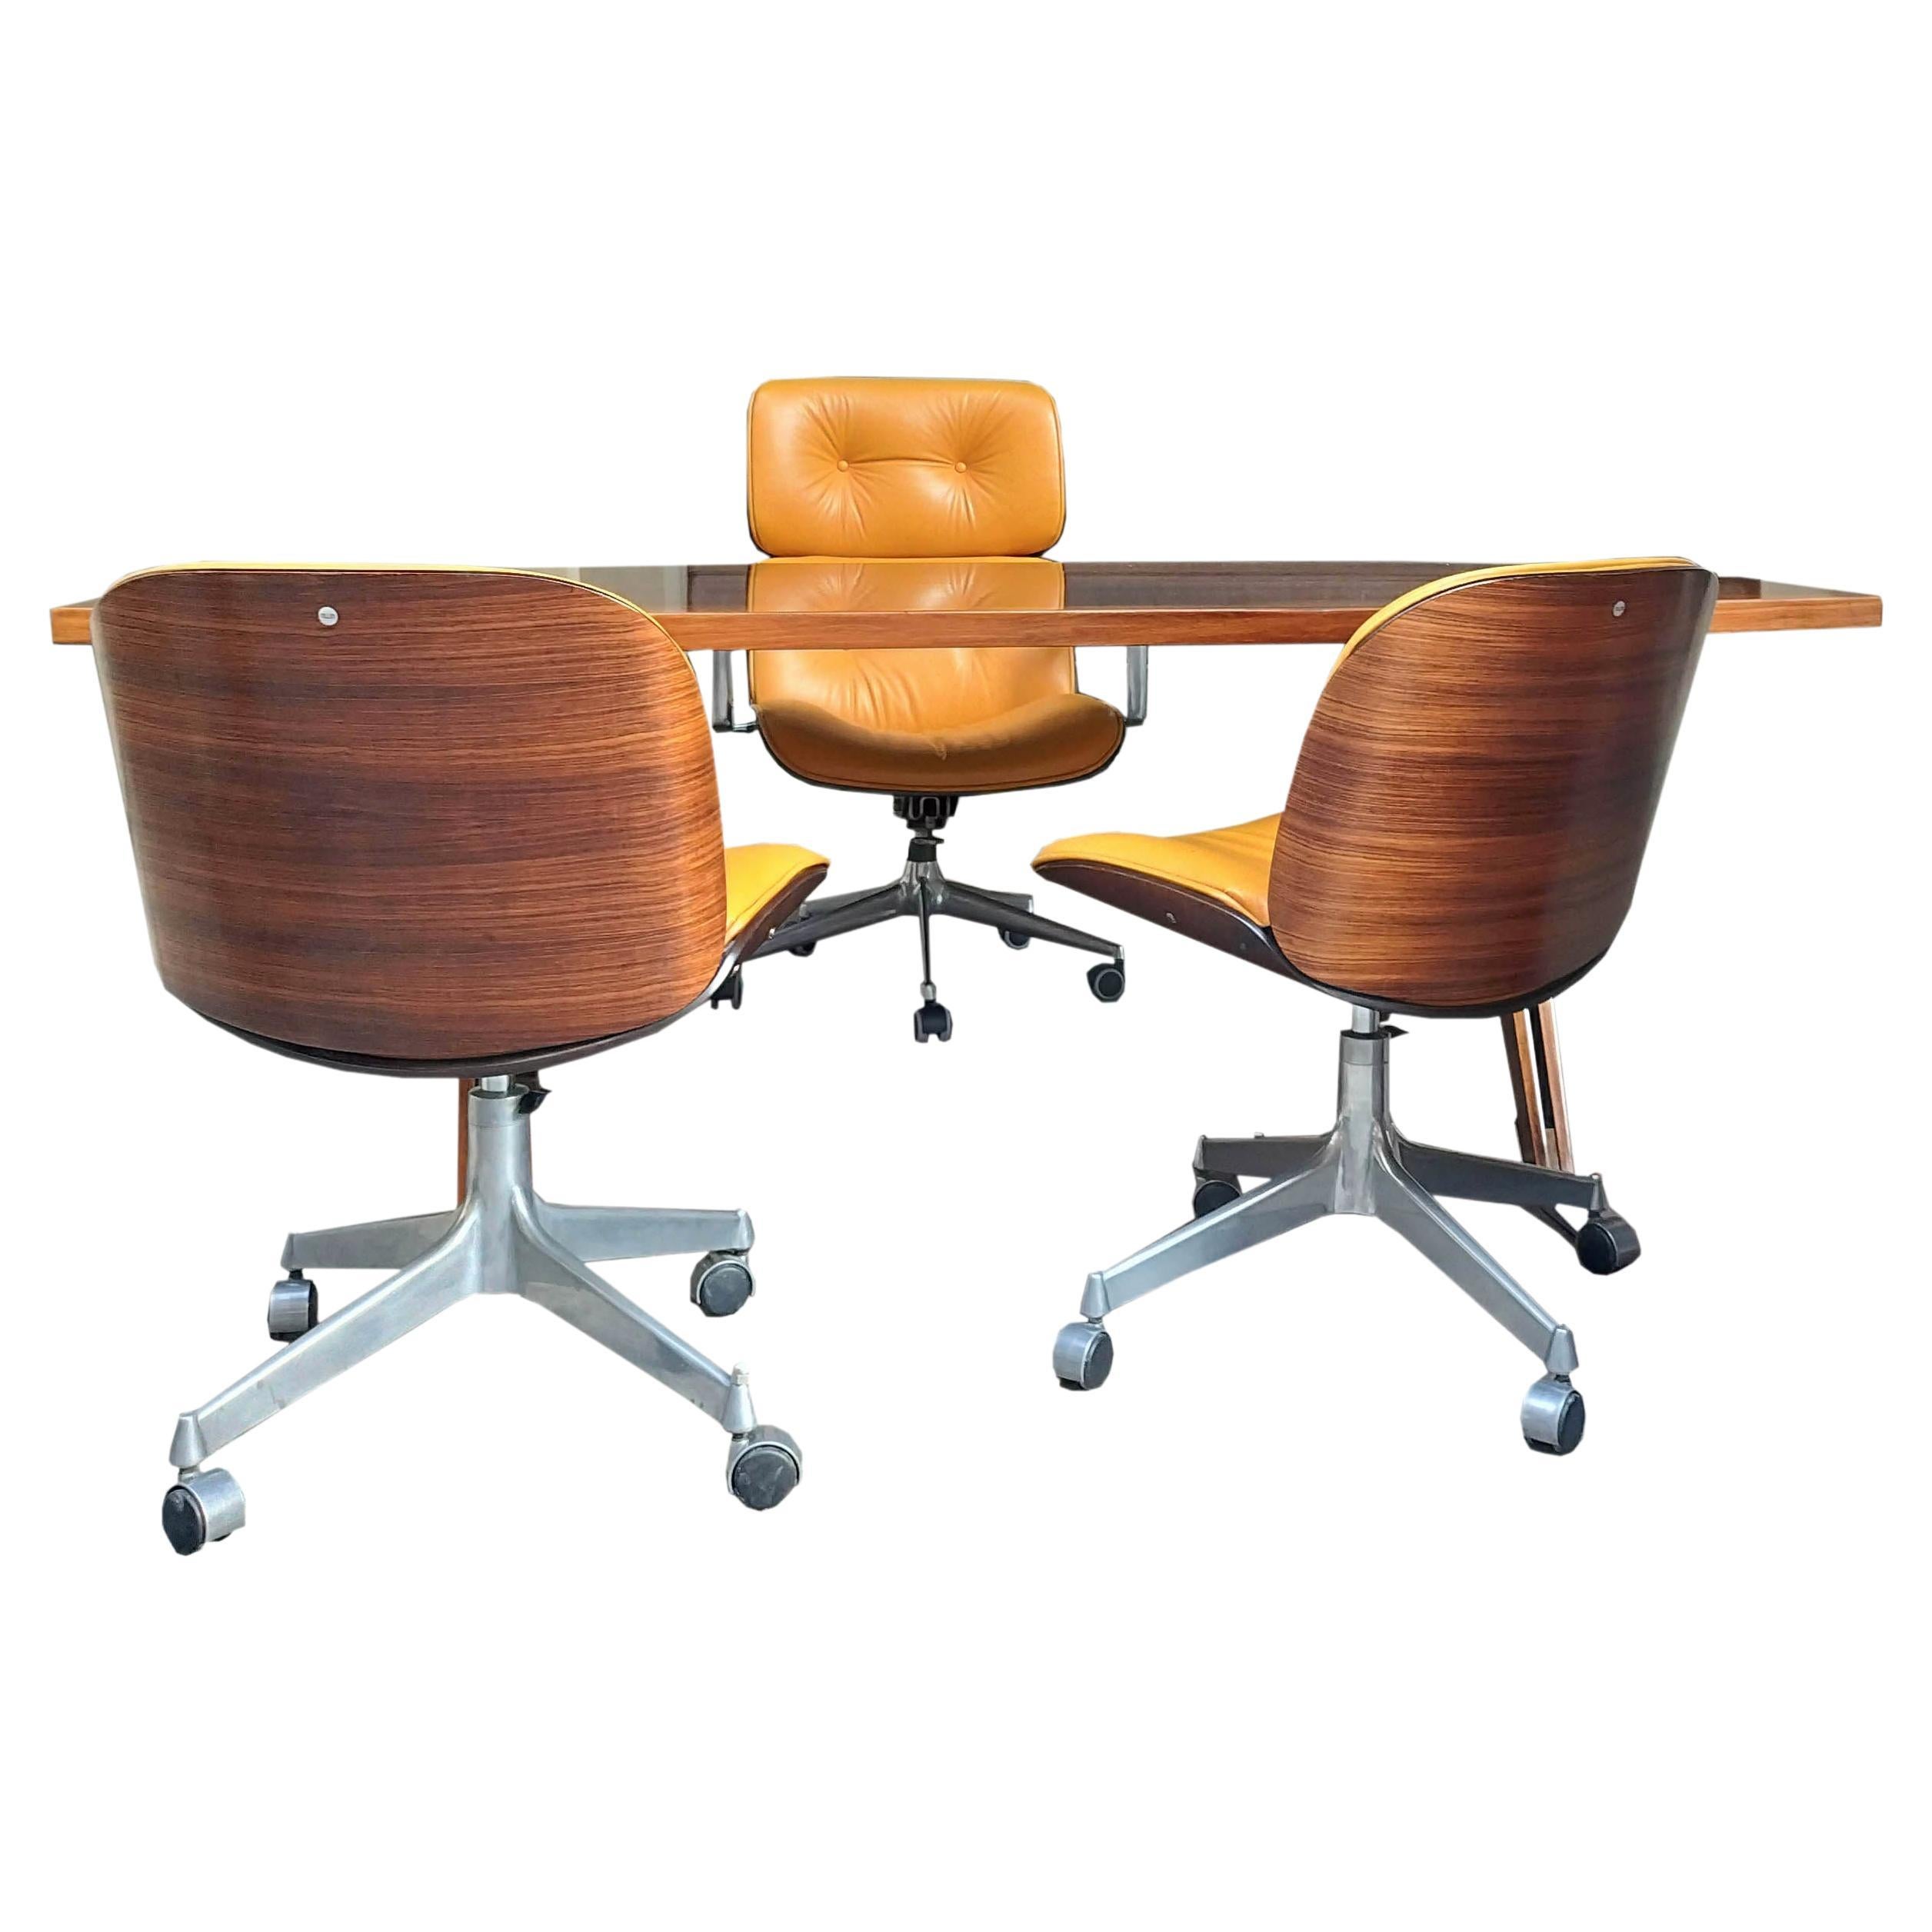 Ico Parisi for Mim Roma Desk, an Executive Armchair and a pair of Swiwel Chairs